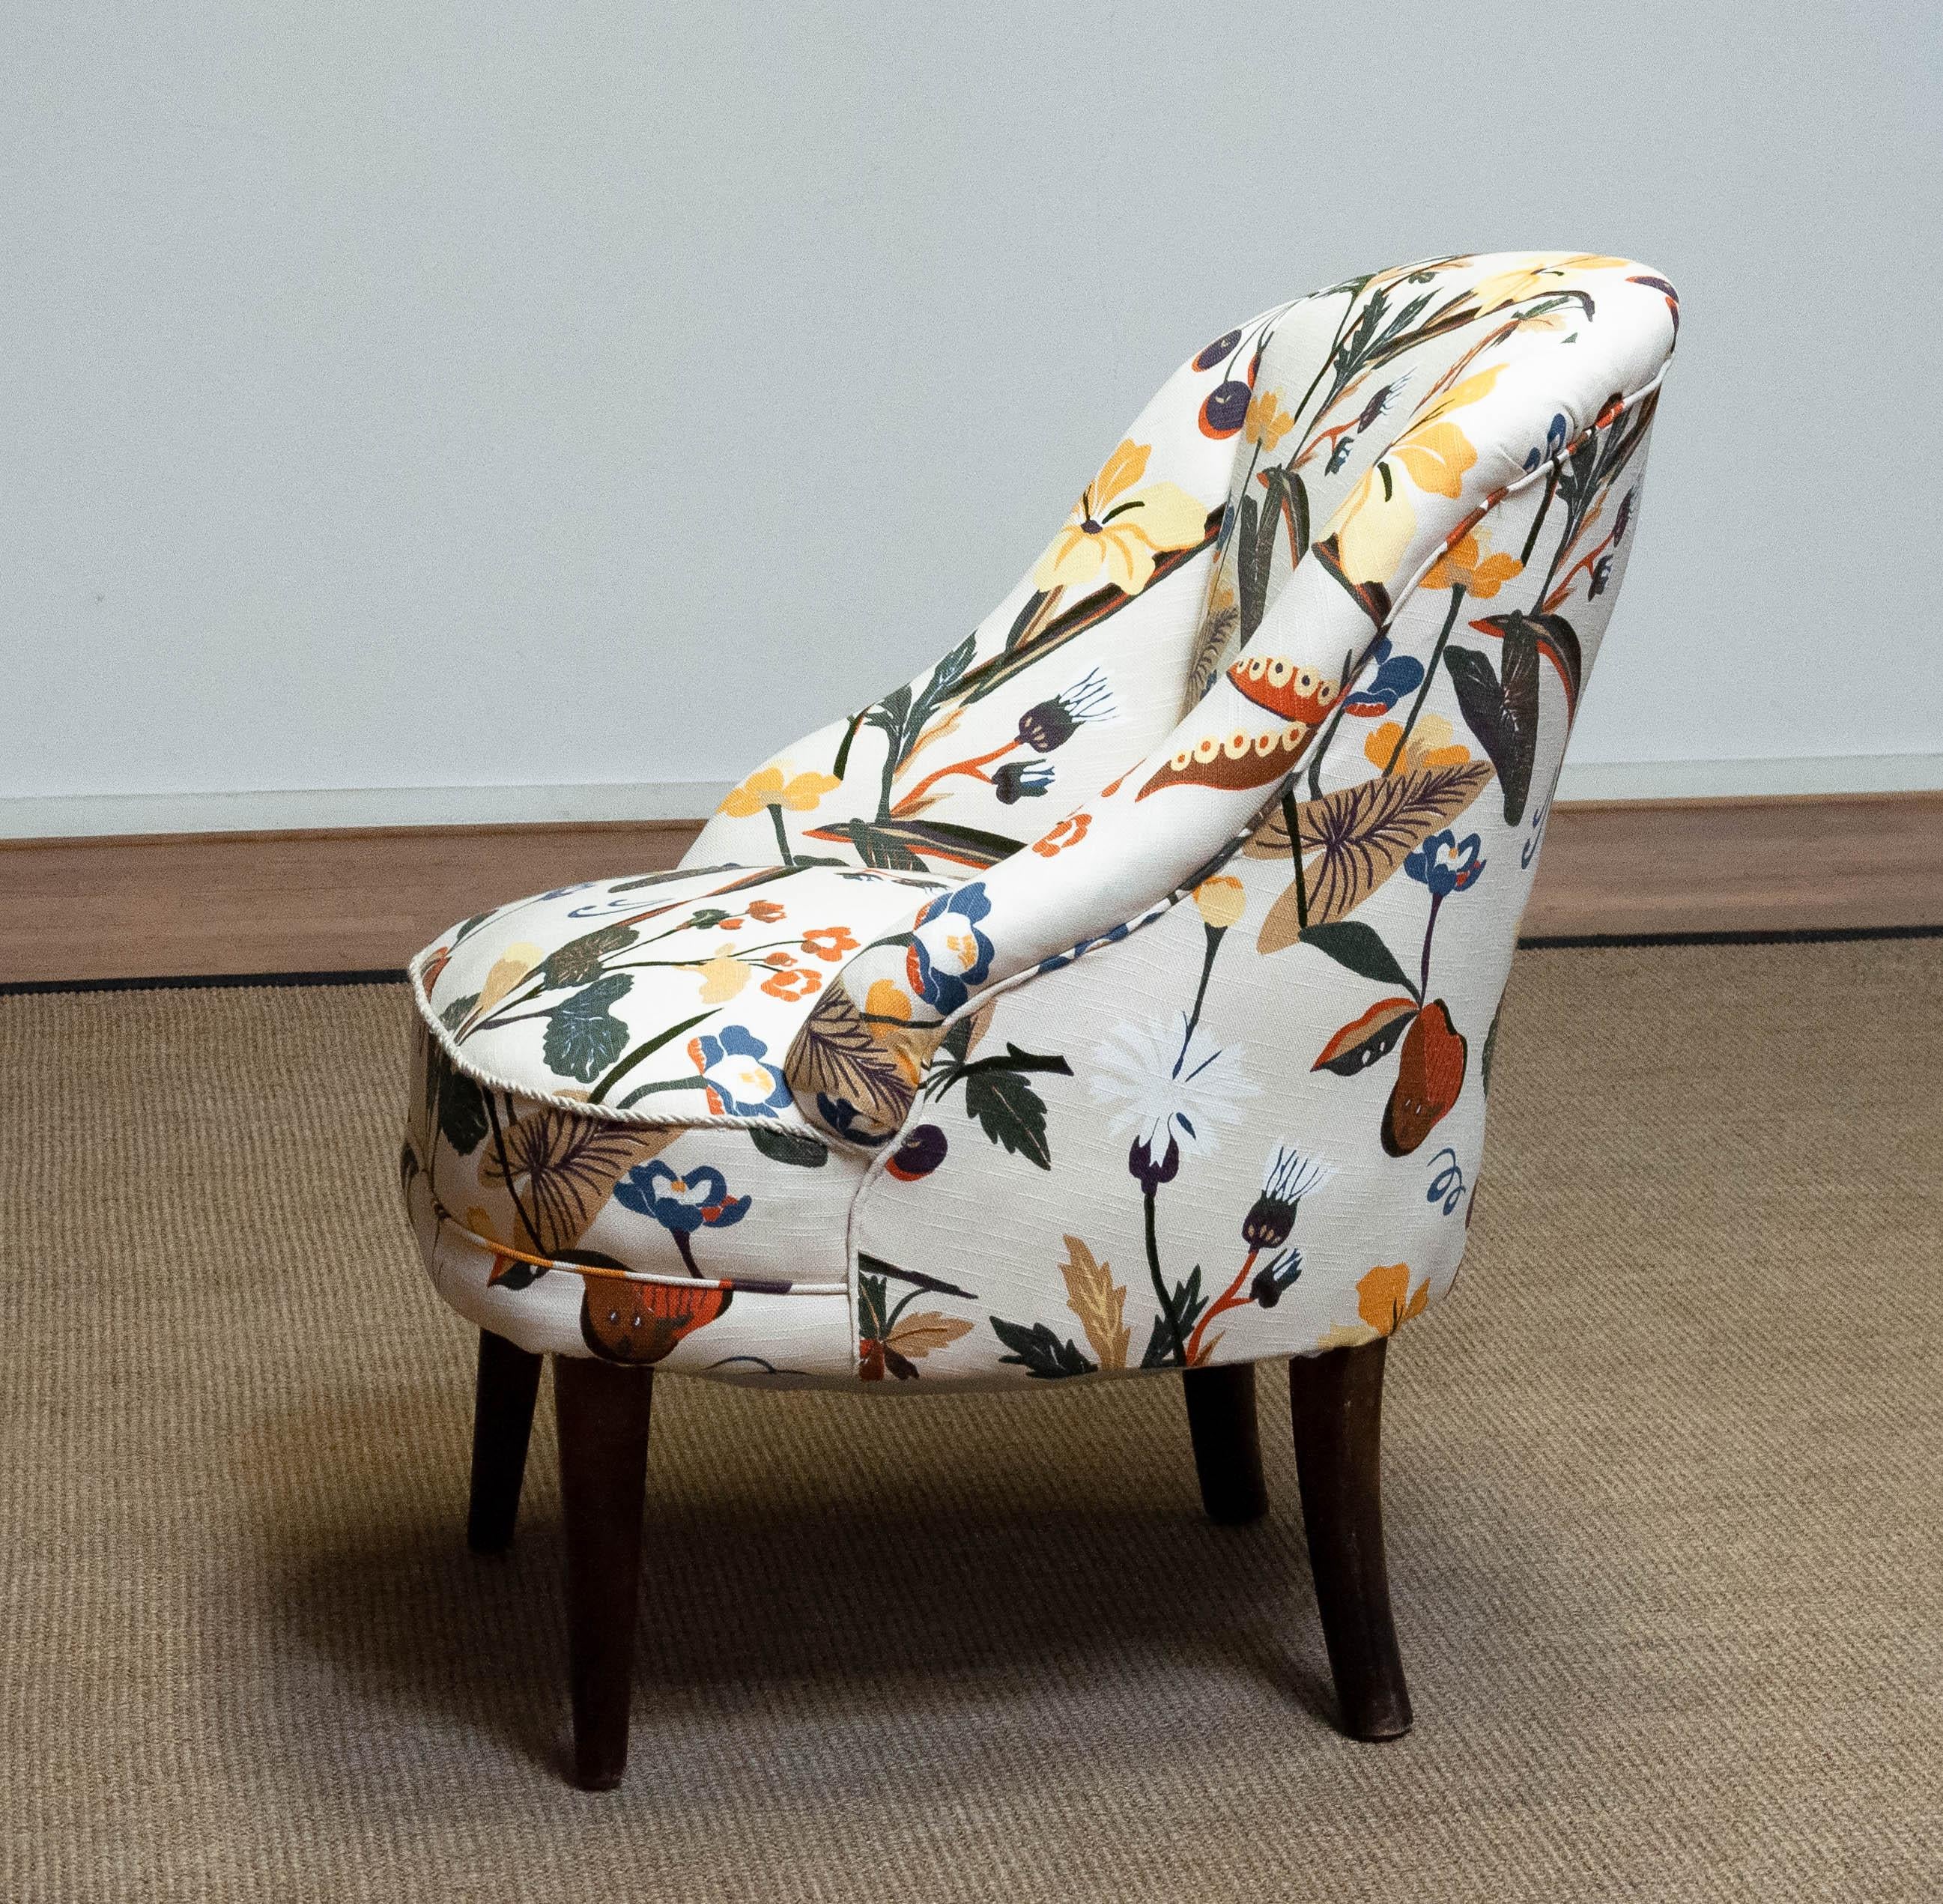 '40s Floral Printed Linen, J. Frank Style, New Upholstered Danish Slipper Chair In Good Condition For Sale In Silvolde, Gelderland